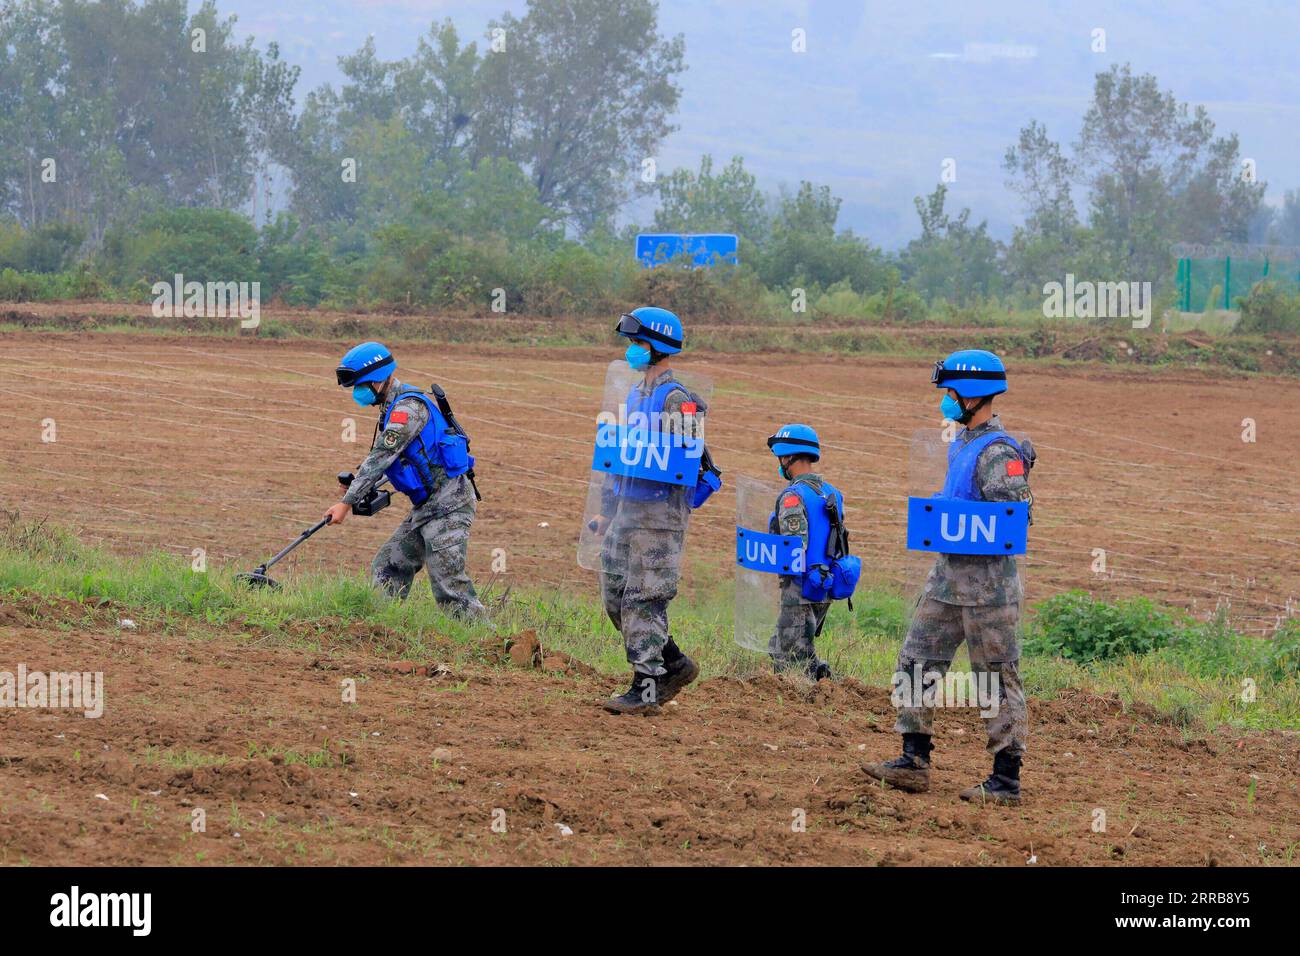 210908 -- ZHENGZHOU, Sept. 8, 2021 -- Peacekeepers participate in an international peacekeeping drill at a combined-arms tactical training base of the Chinese People s Liberation Army PLA in central China s Henan Province, Sept. 7, 2021. China started holding an international peacekeeping drill code-named Shared Destiny-2021 on Sept. 6. Drills of battlefield reconnaissance, security guarding and patrol, armed escort, protection of civilians, response to violent and terrorist attacks, construction of temporary operation base, battlefield first aid, and pandemic control are expected to be conduc Stock Photo